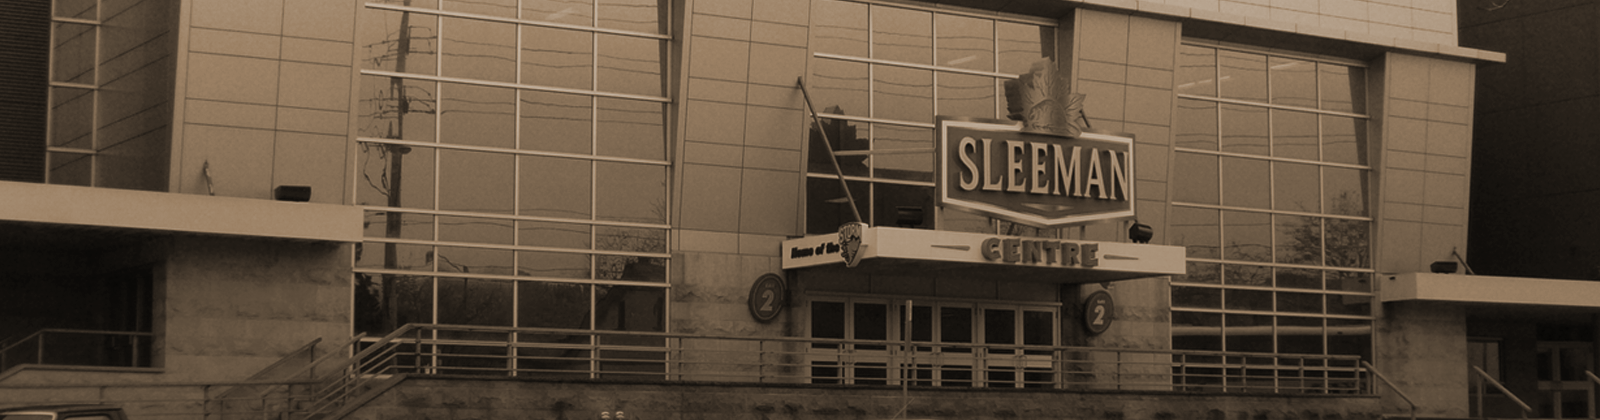 Exterior Shot of Sleeman Centre by Tabercil